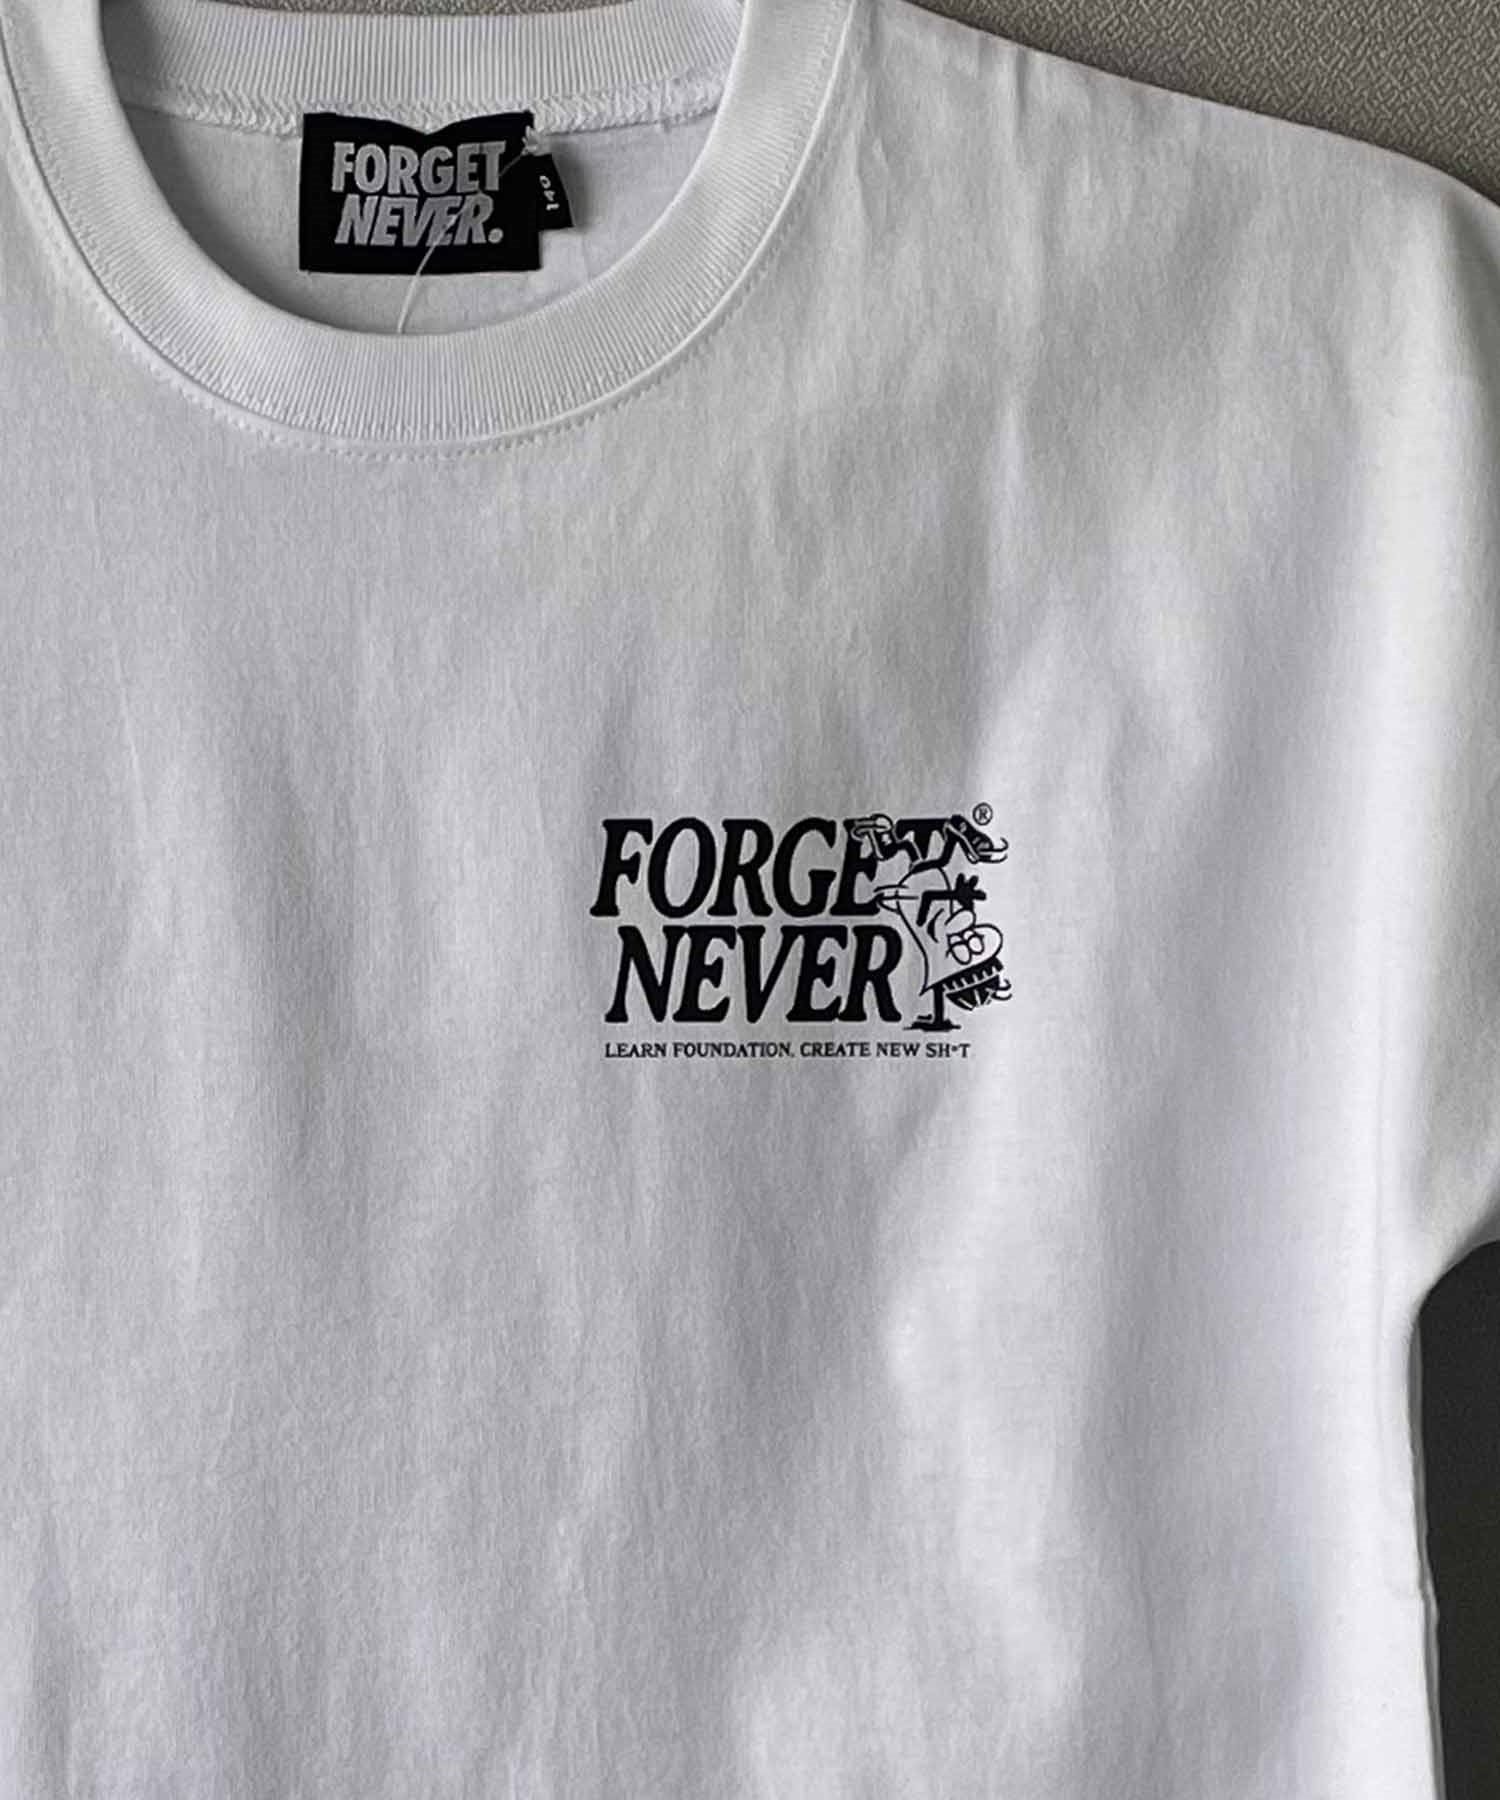 FORGET NEVER フォーゲットネバー キッズ 半袖 Tシャツ バックプリント ムラサキスポーツ限定 242OO3ST209FN(WHT-130cm)